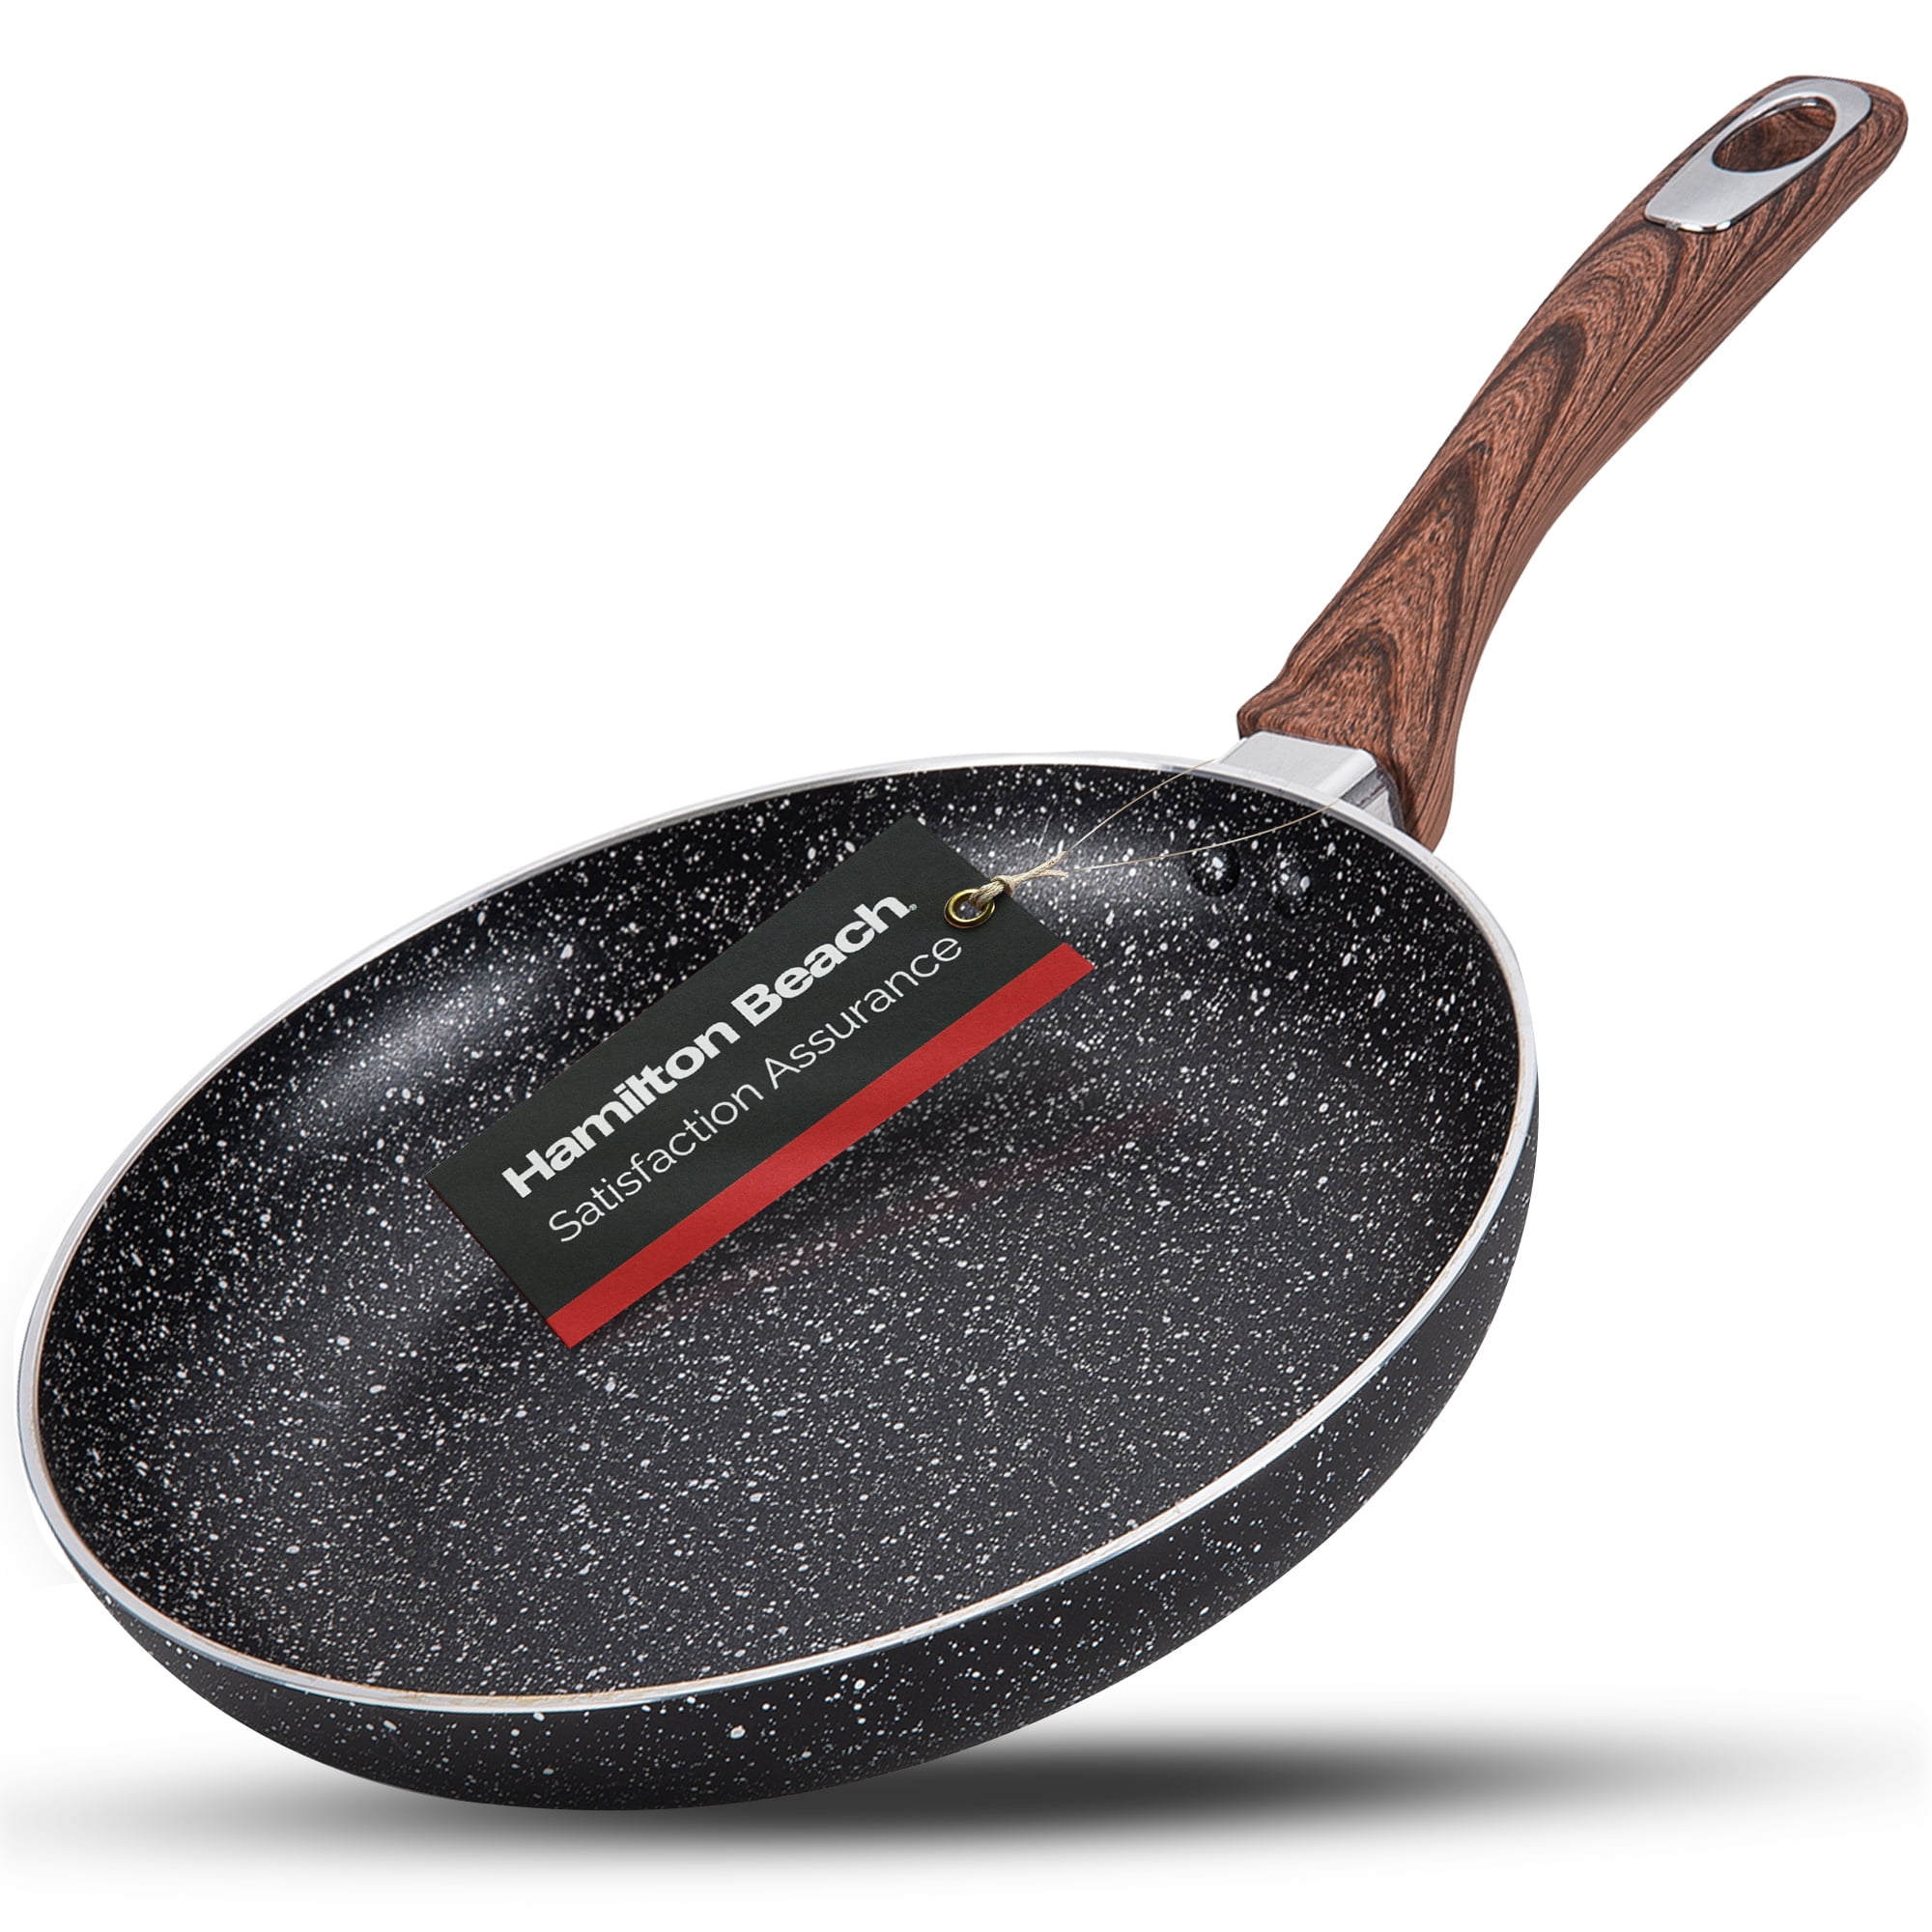 HLAFRG 12 Inch Nonstick Frying Pan with Lid, Blue Marble Skillet with  Stone-Derived Coating, APEO & PFOA Free, With Soft-touch Ergonomic Handle,  Oven